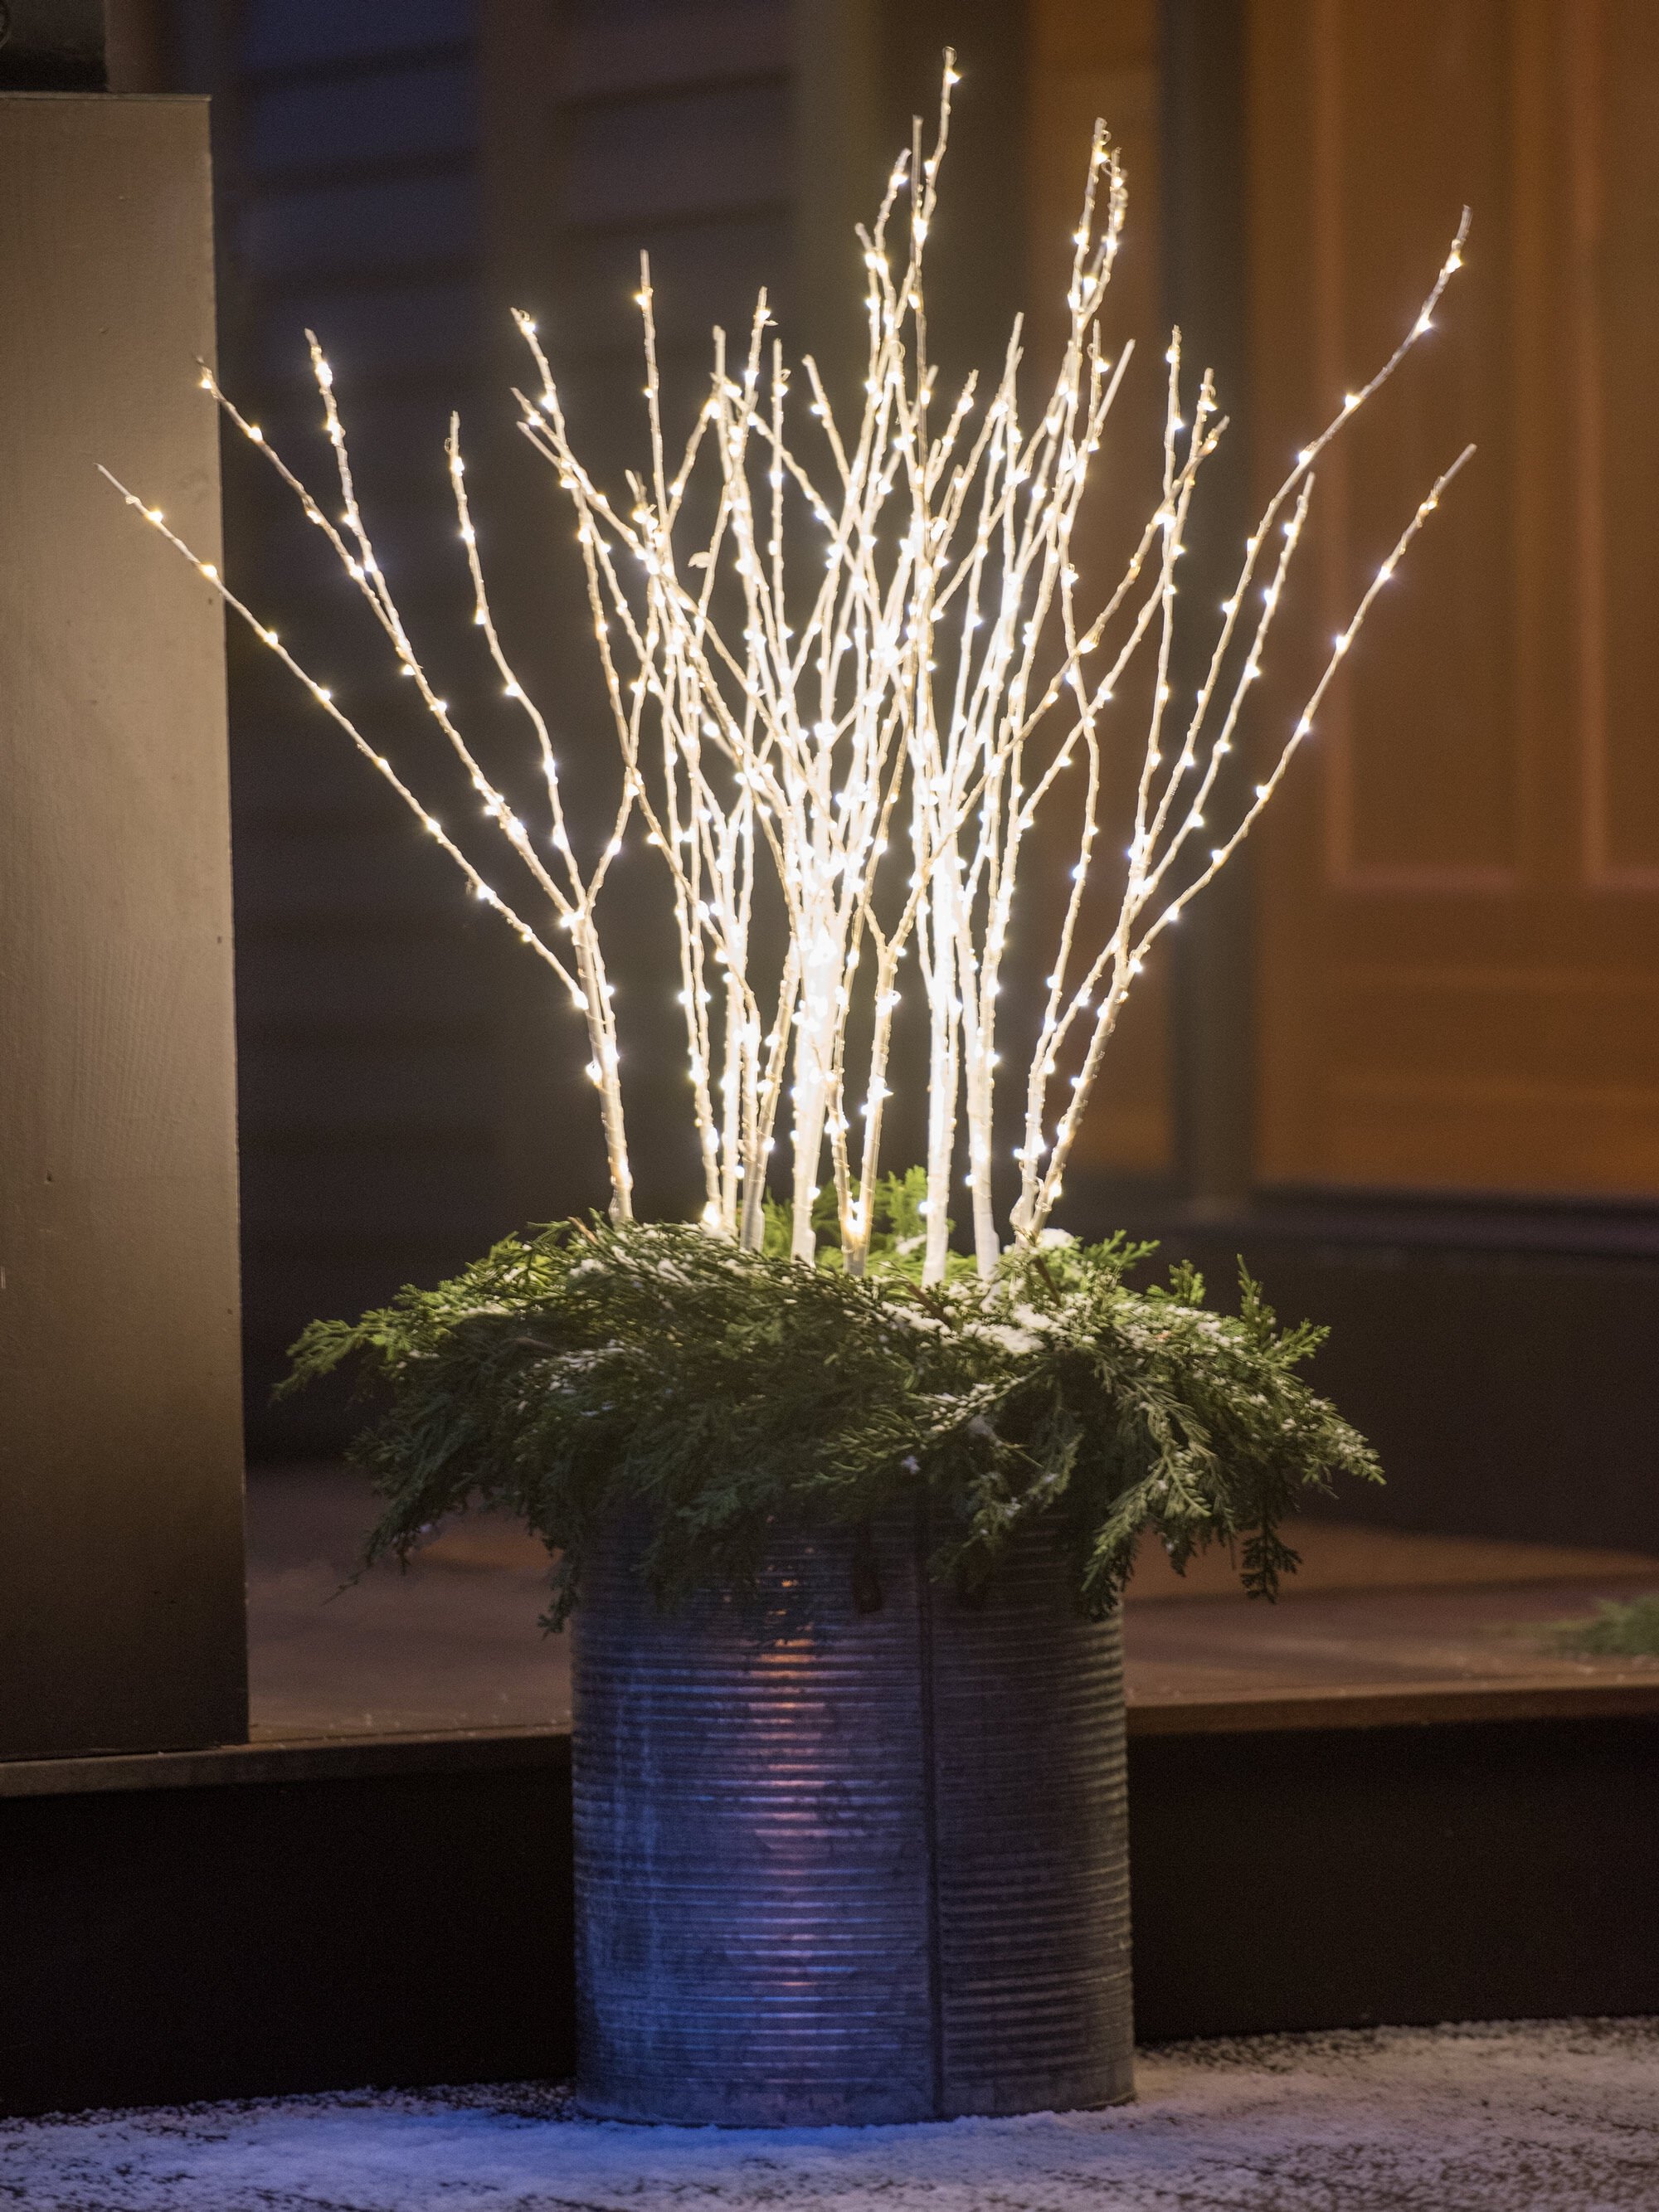 *60” LED Lighted Birch Branches 110v plug in